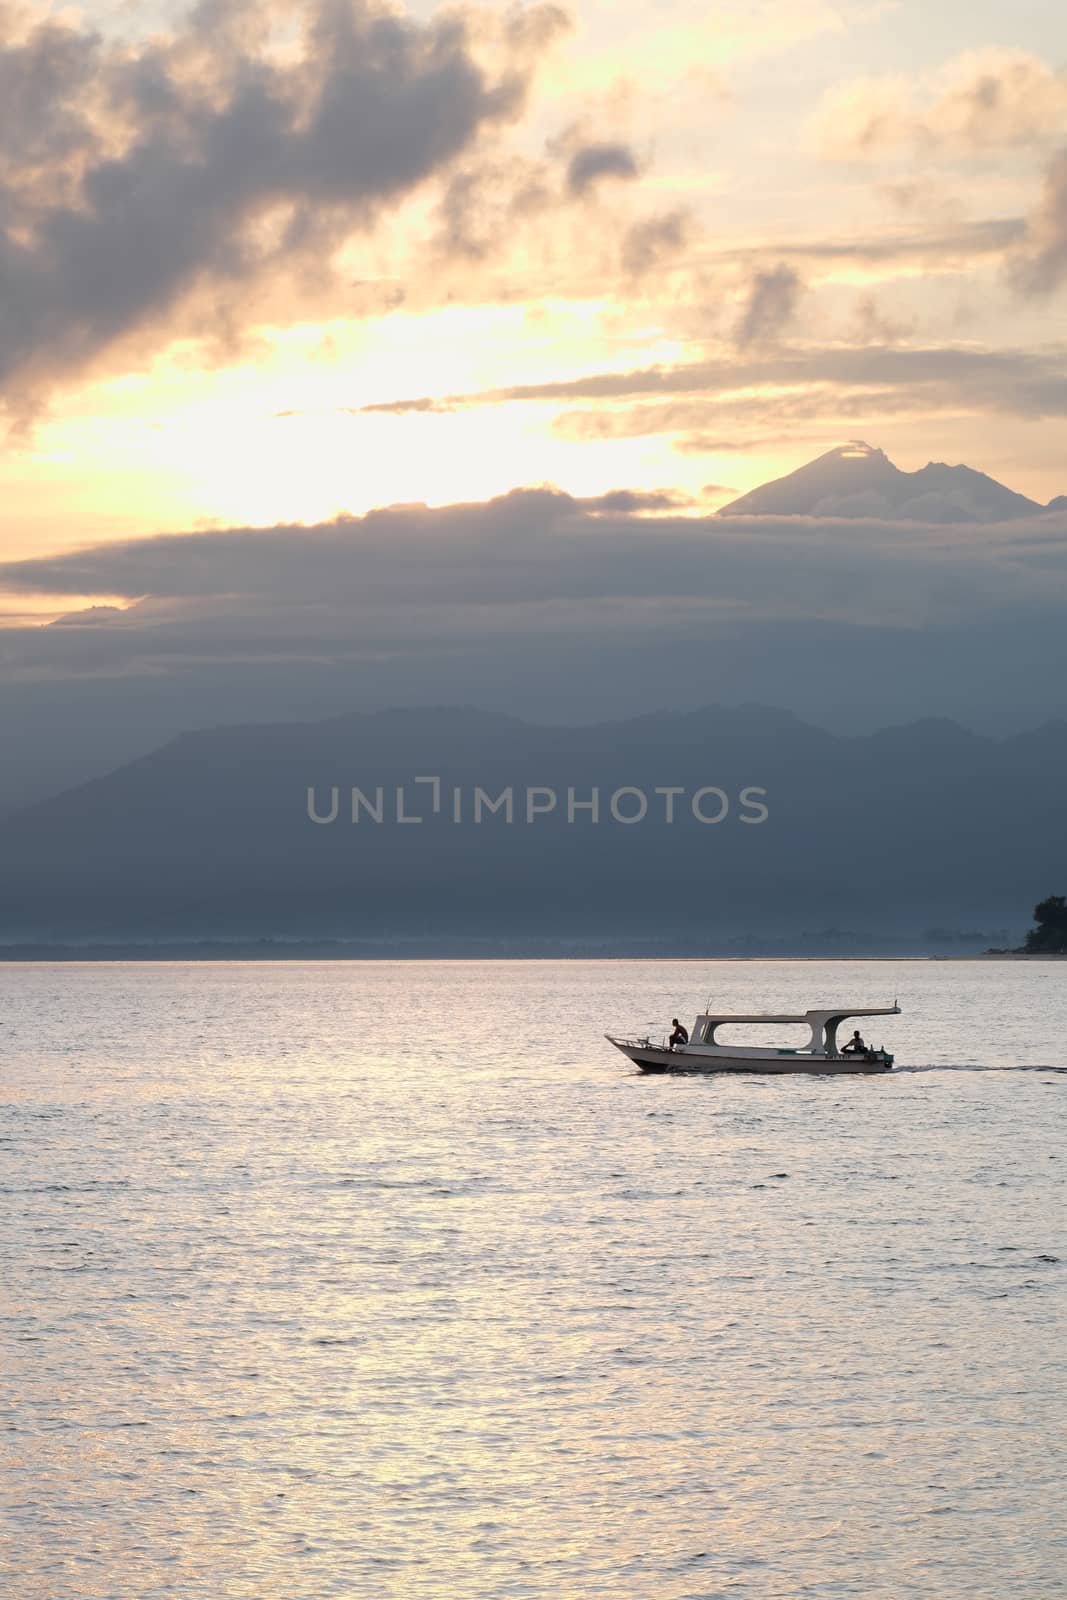 Indonesian fisherman in the boat early morning. Lombok volcano R by rainfallsup